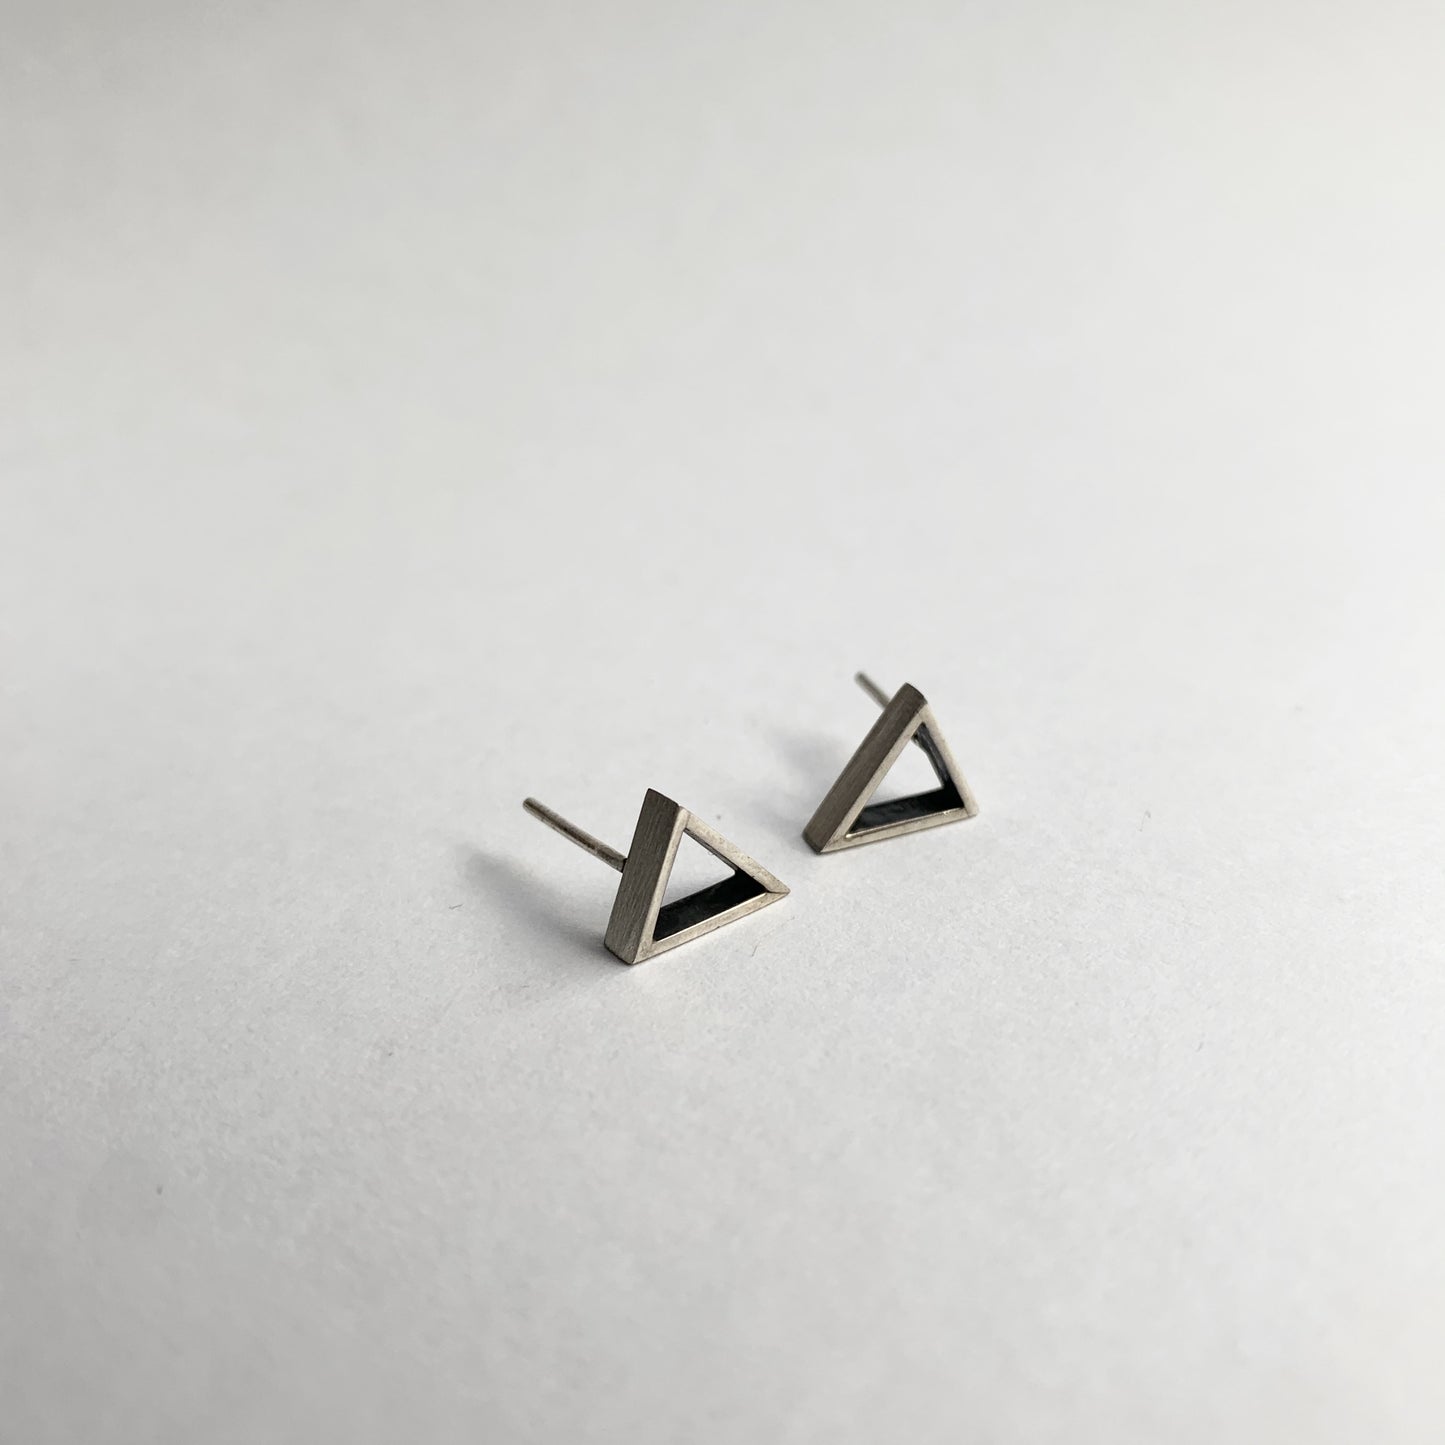 Small sterling silver 3D triangle oxidized earrings